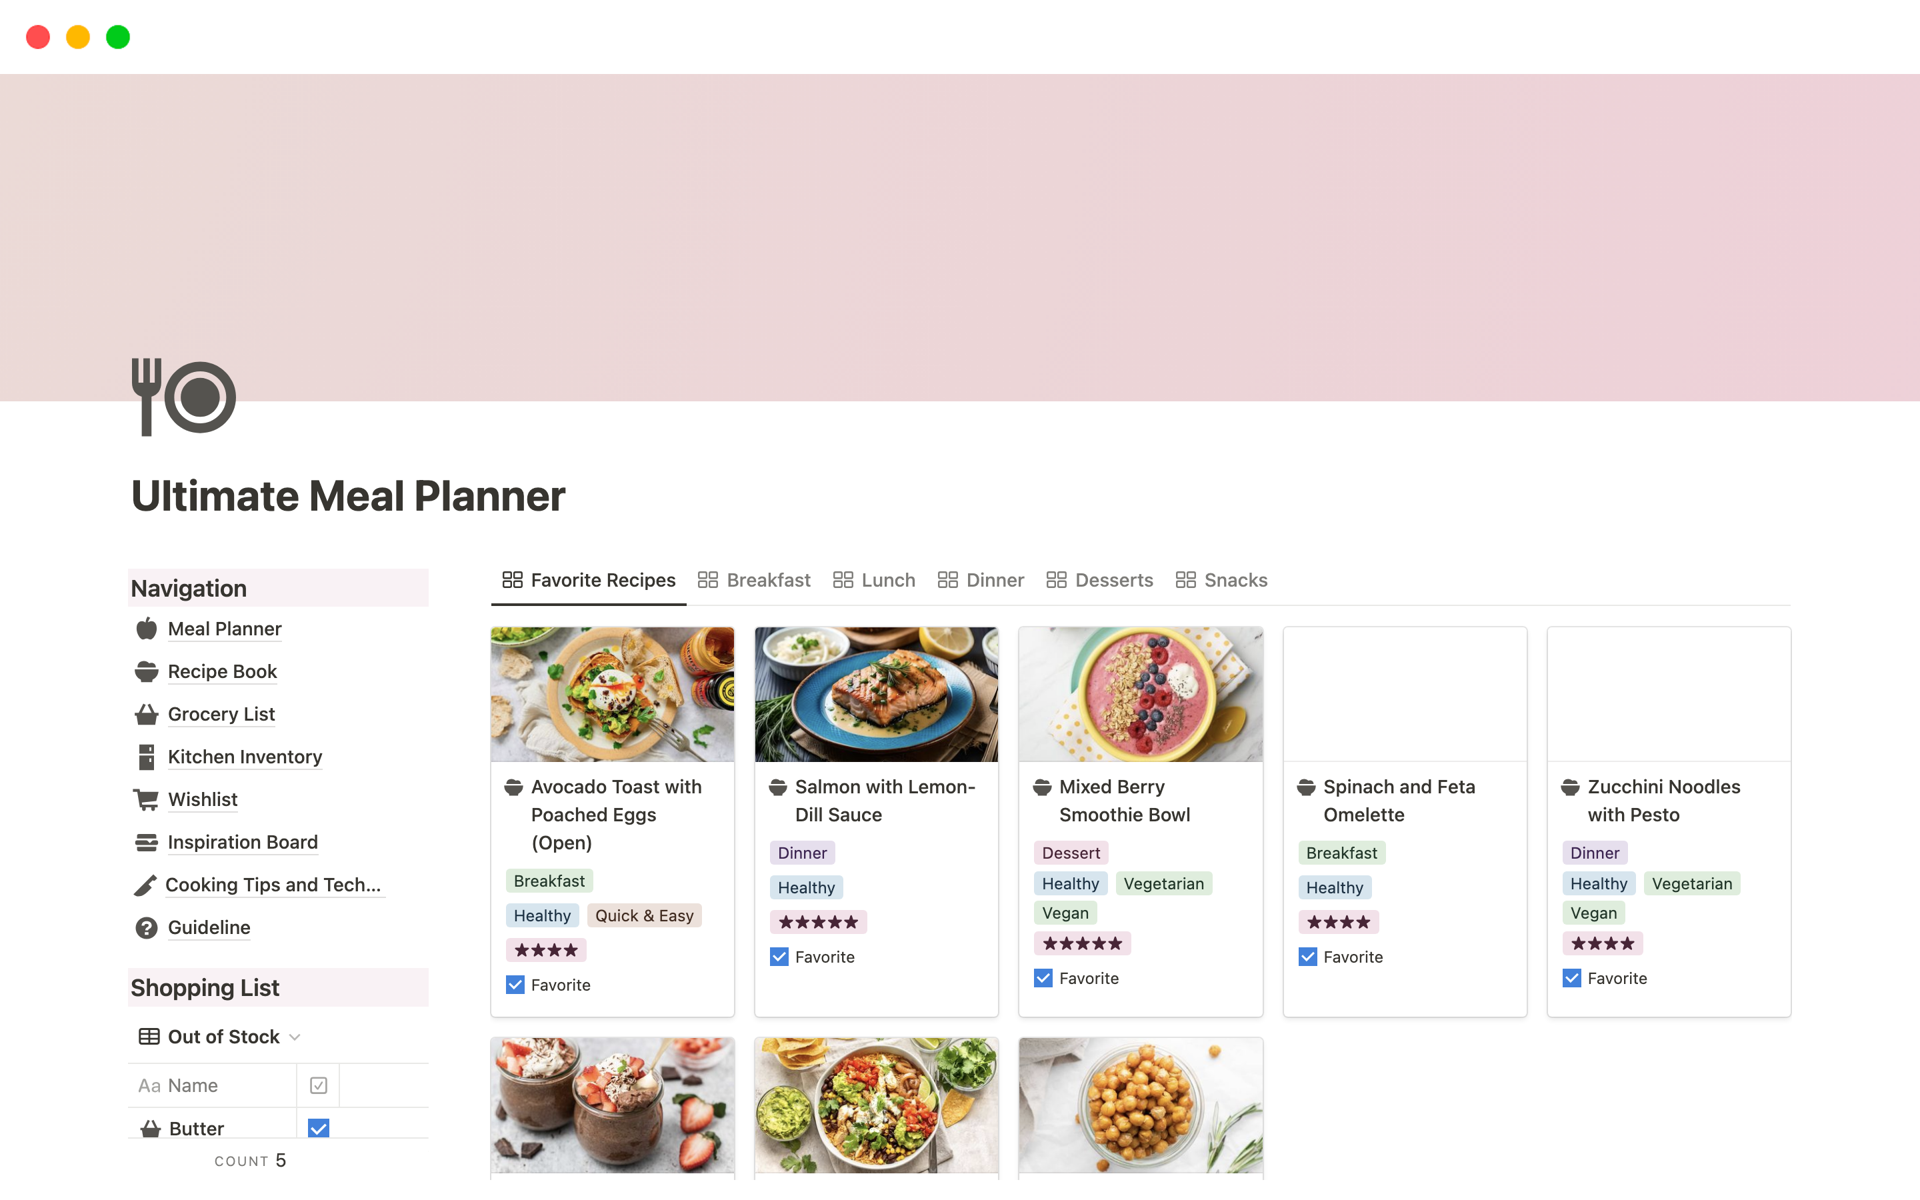 Unlock Ultimate Meal Planning with Our All-in-One Notion Meal Planner Template!